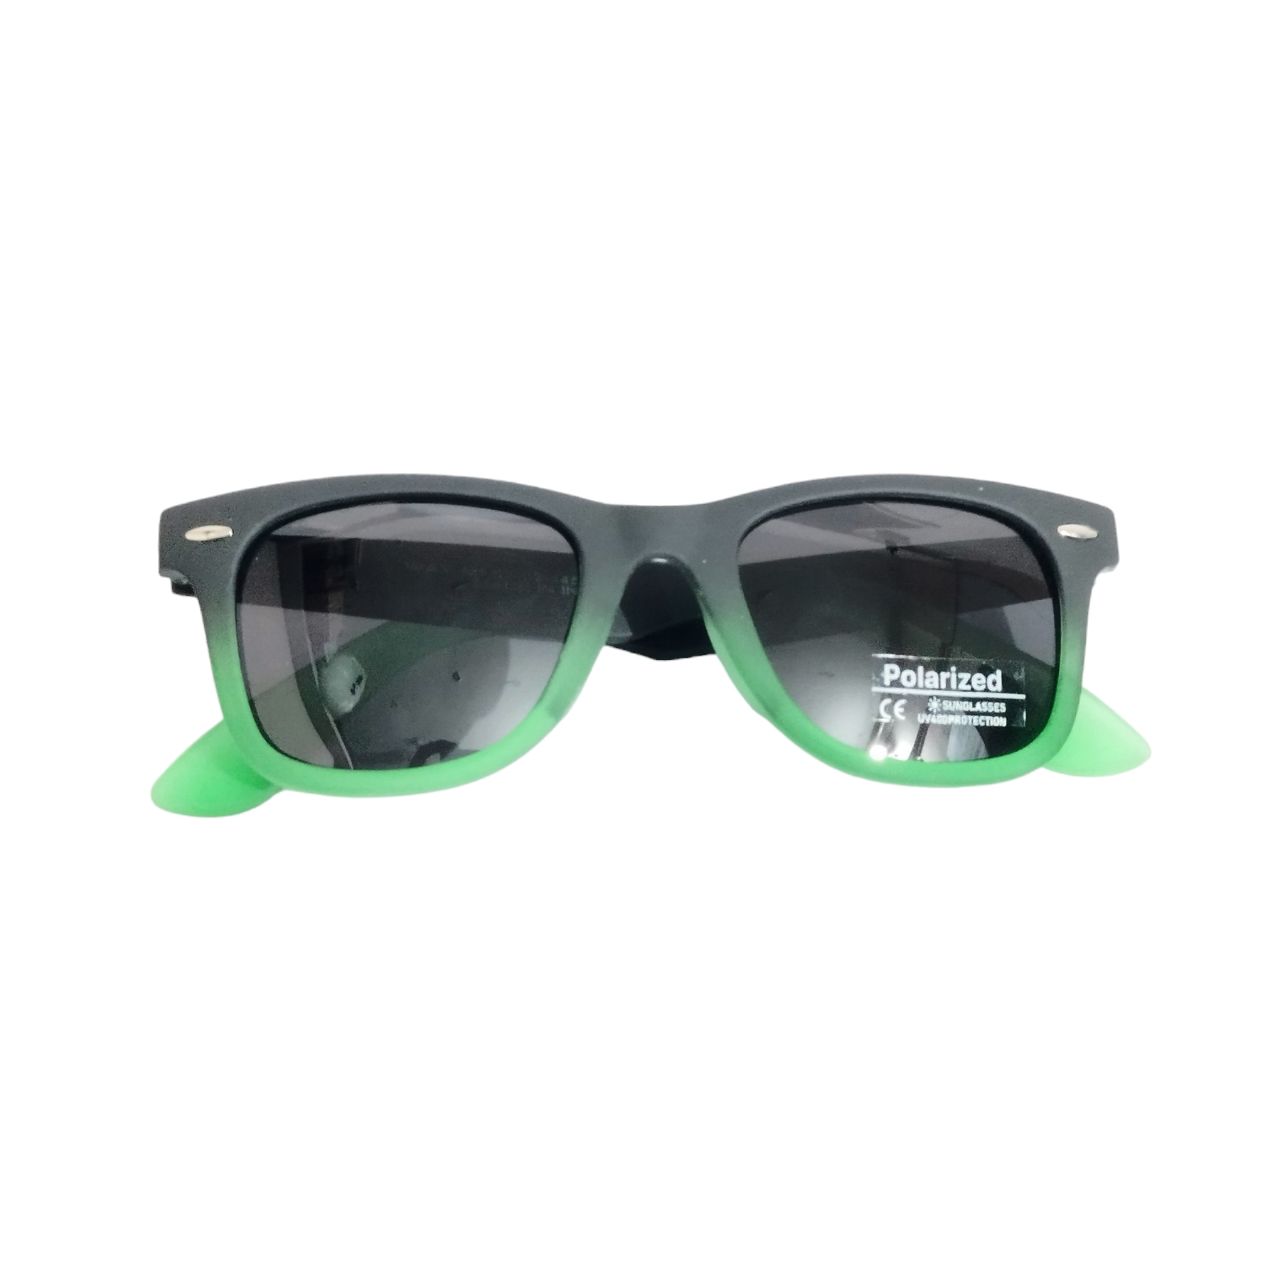 Green Print Classic Polarized Sunglasses for Men and Women